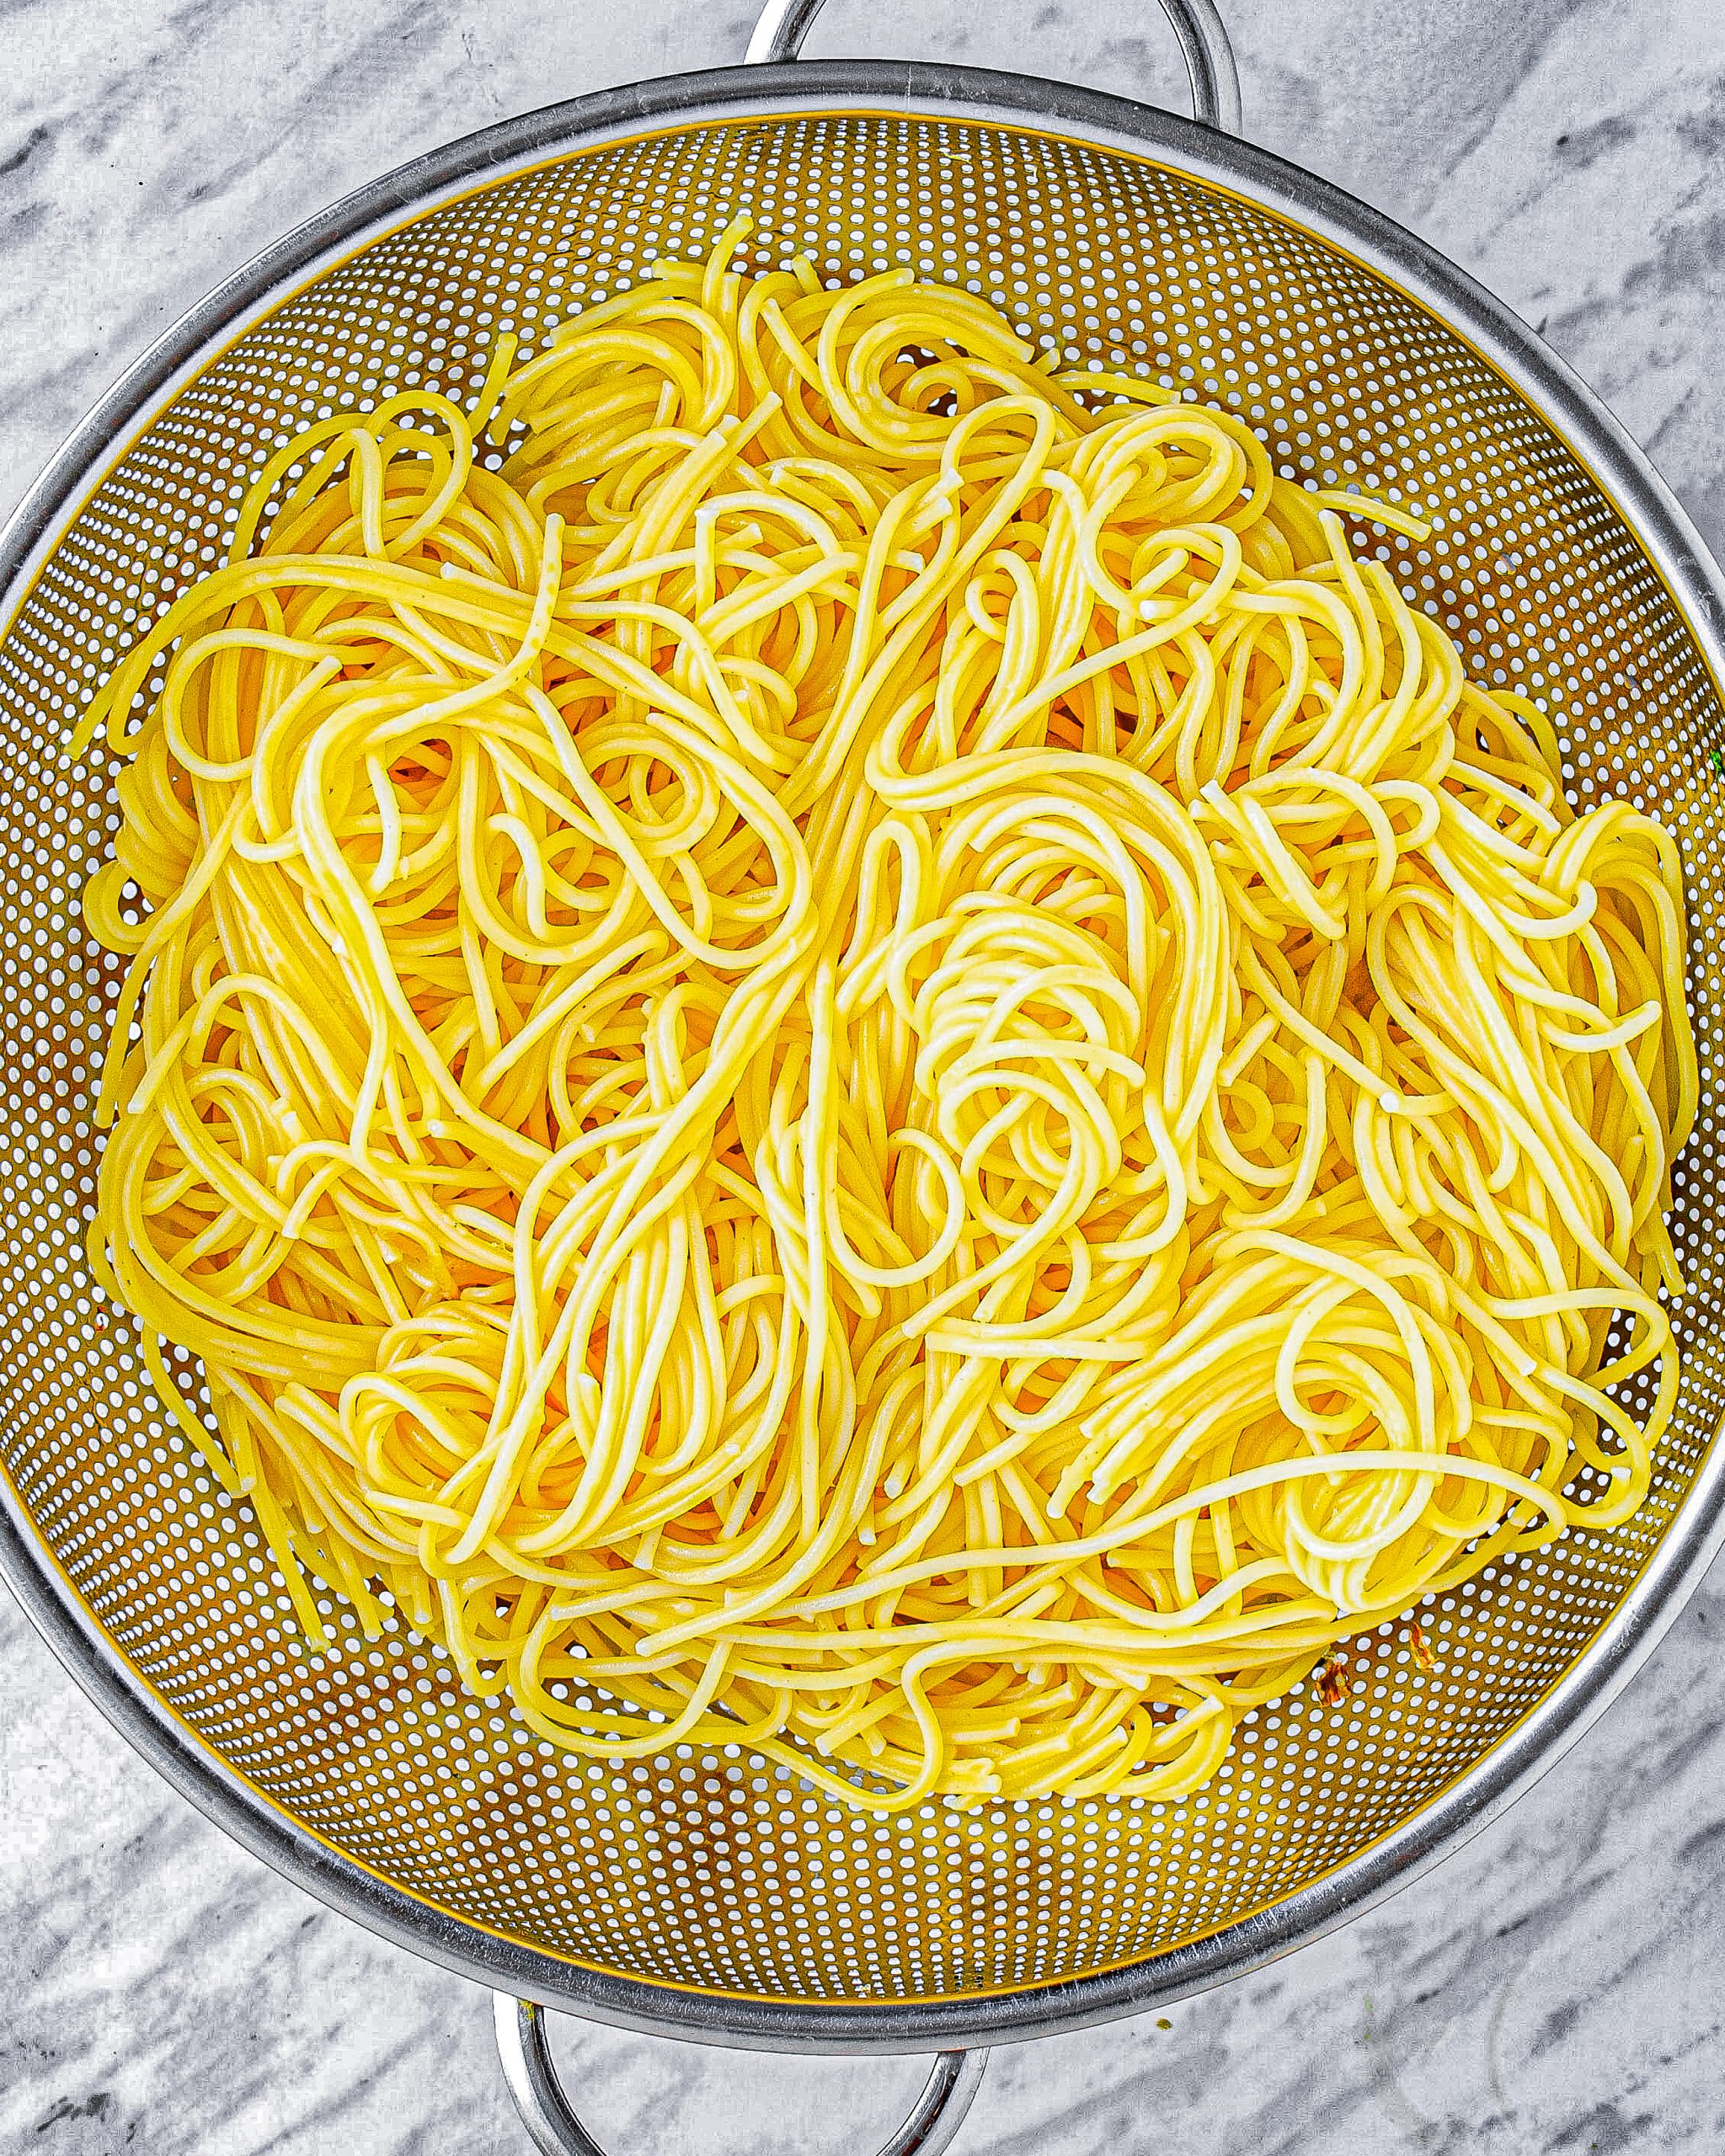 Cook the spaghetti to your liking, rinse under cold water, and drain well.